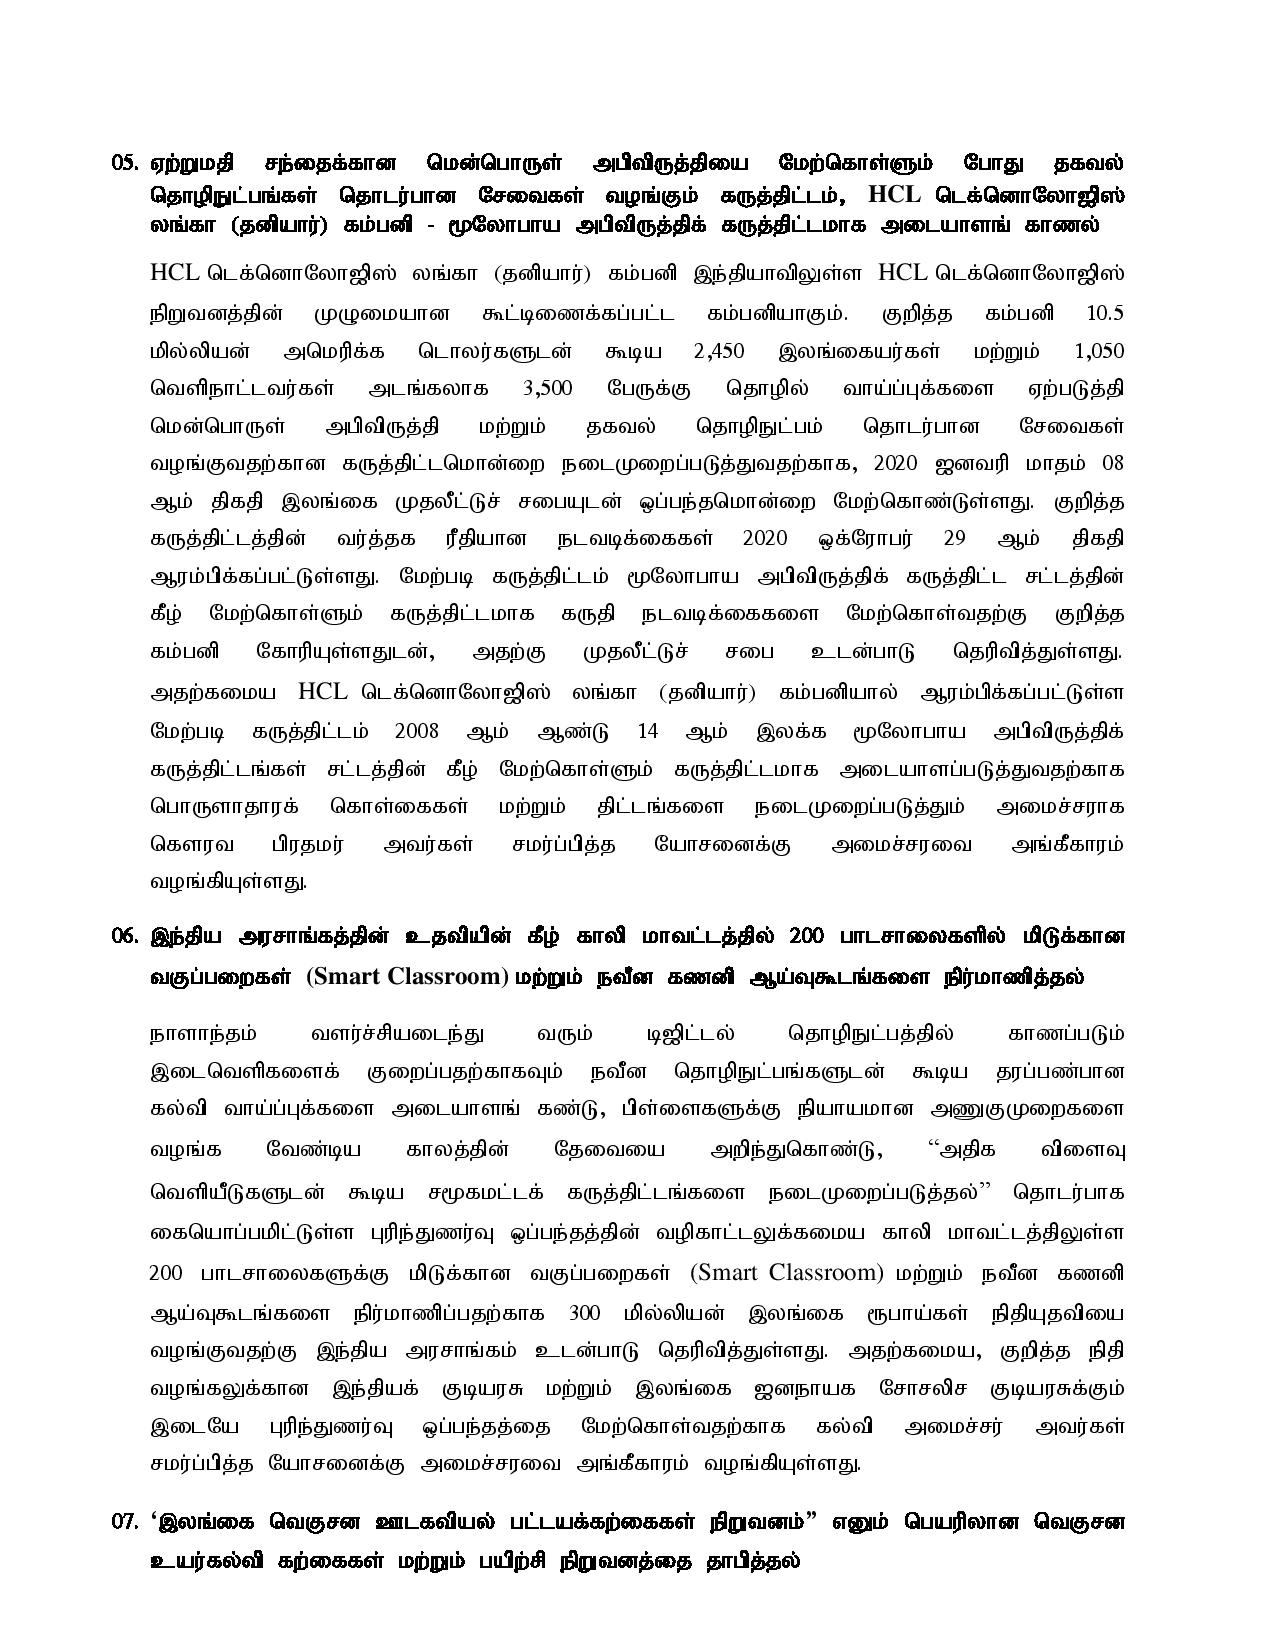 Cabinet Decision on 05.10.2021 Tamil page 003